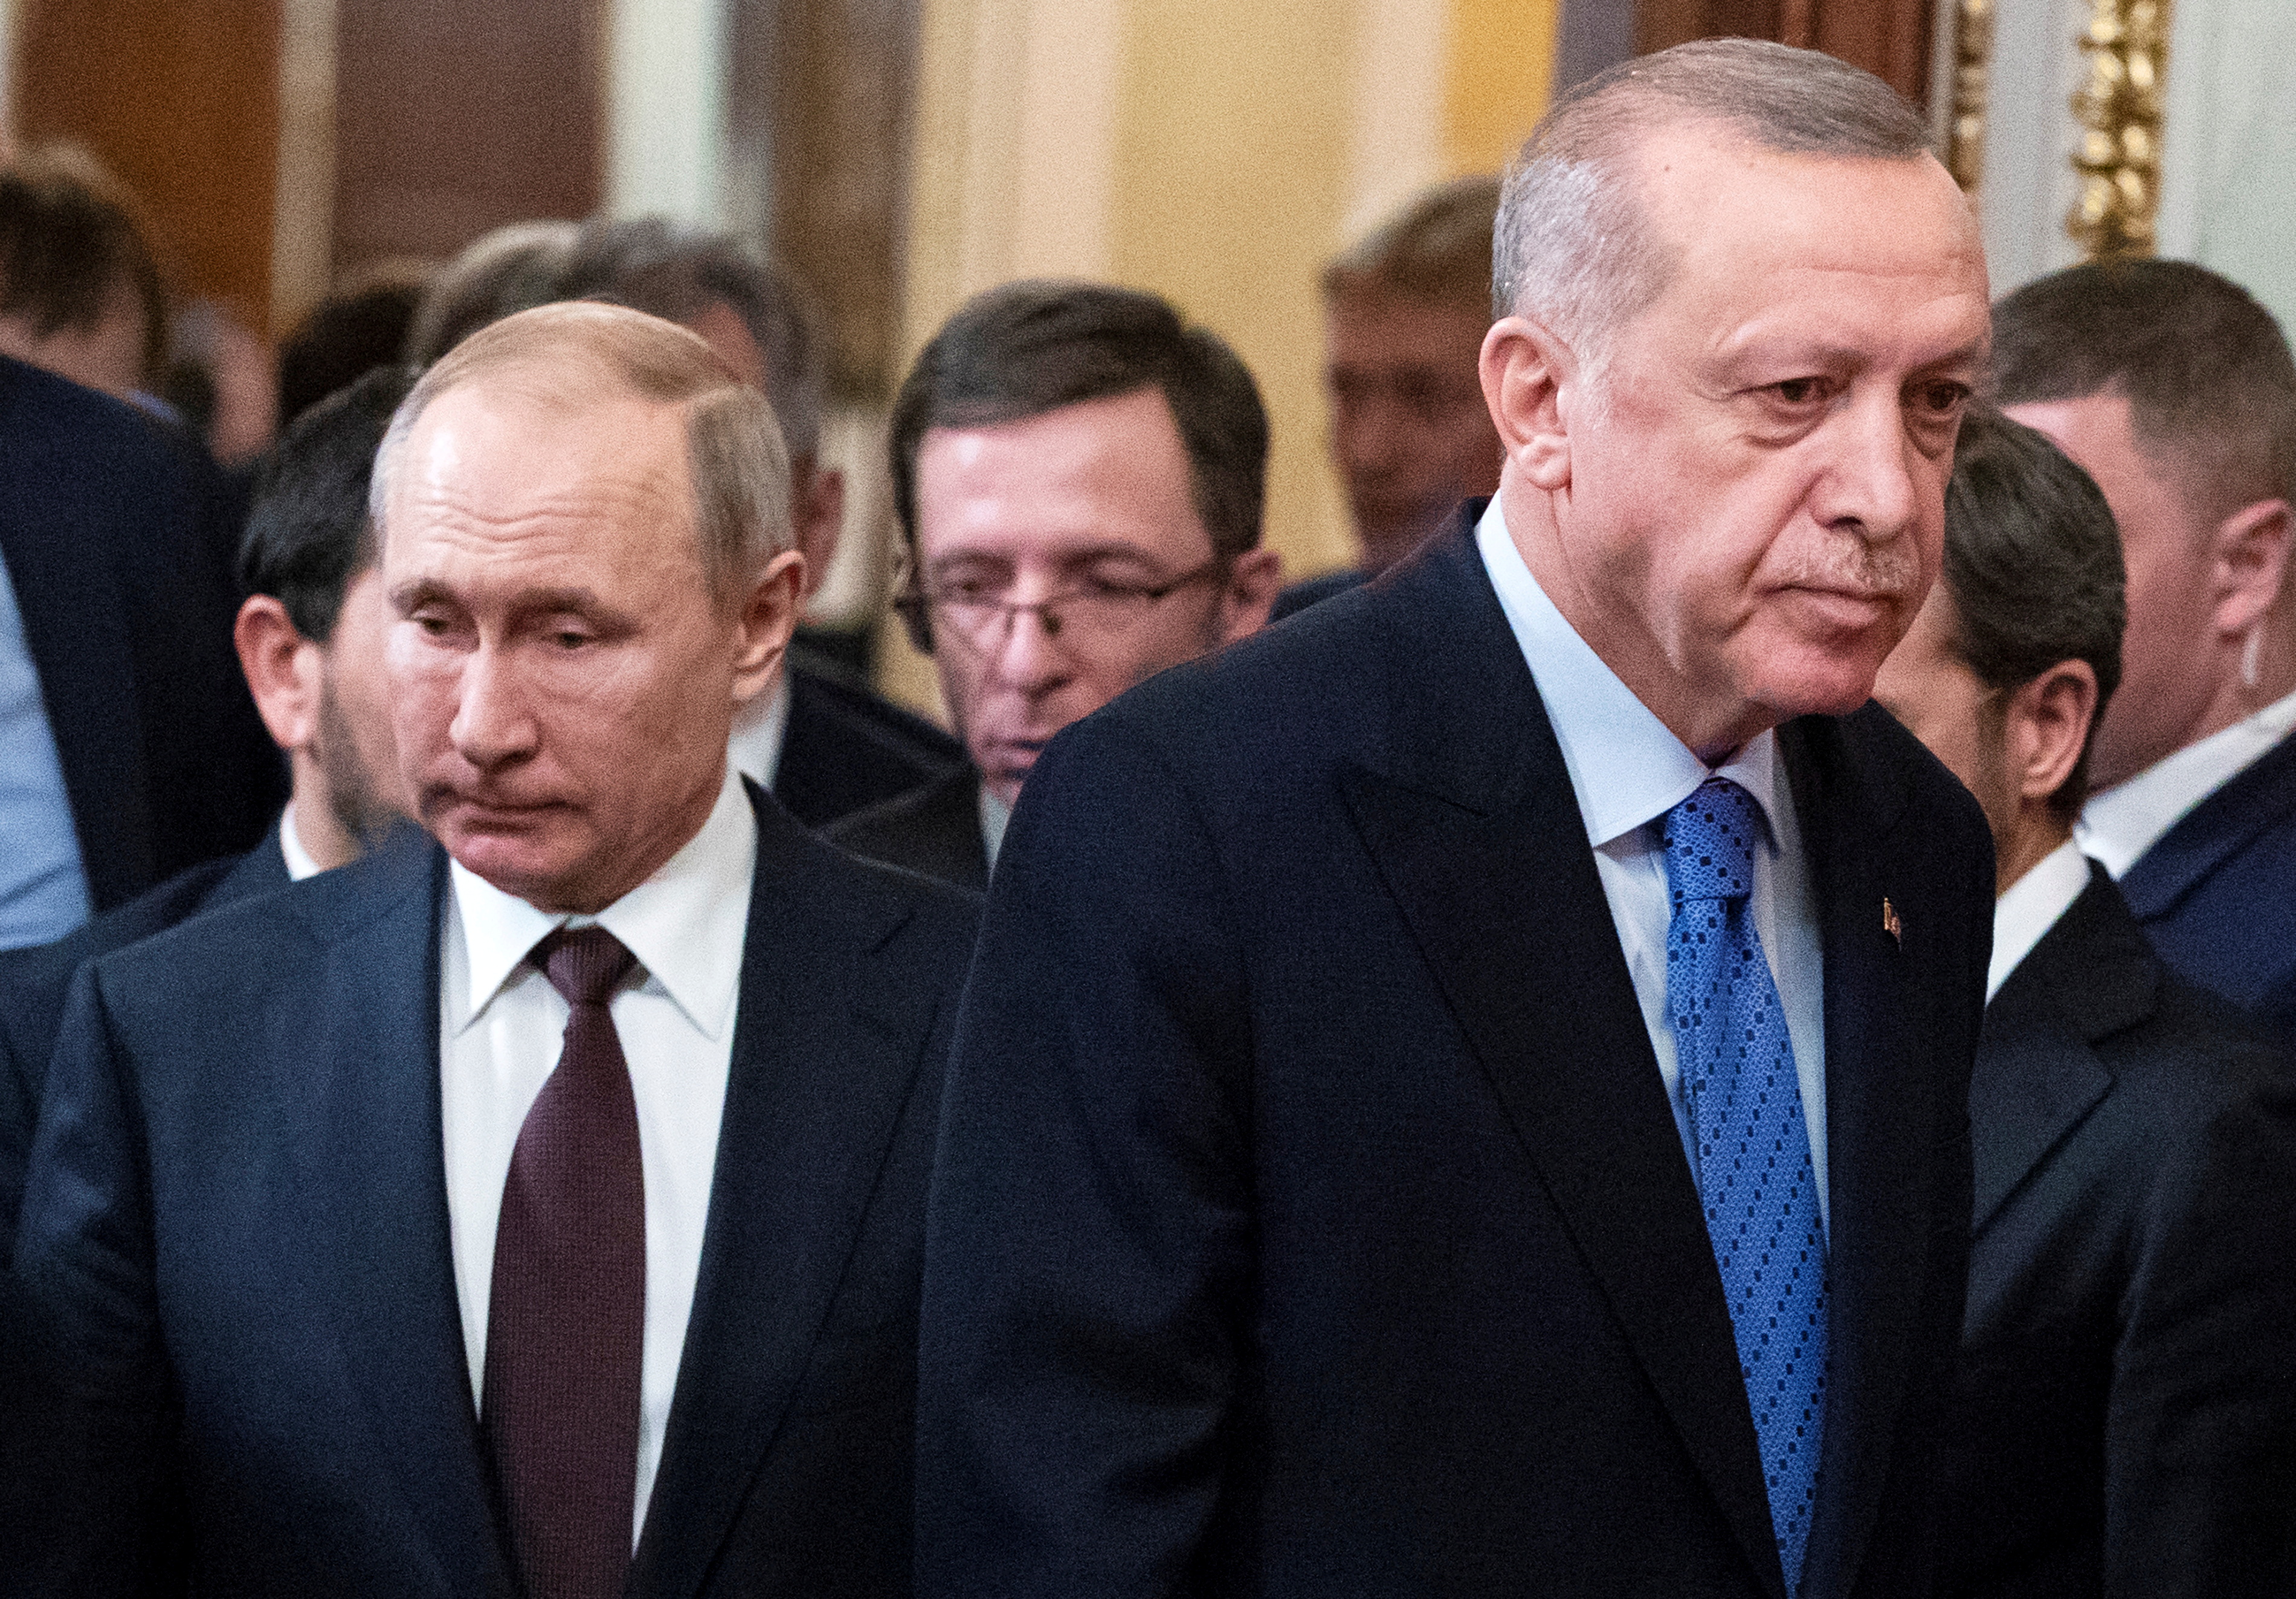 Turkey closed its airspace to Russian planes carrying troops to Syria